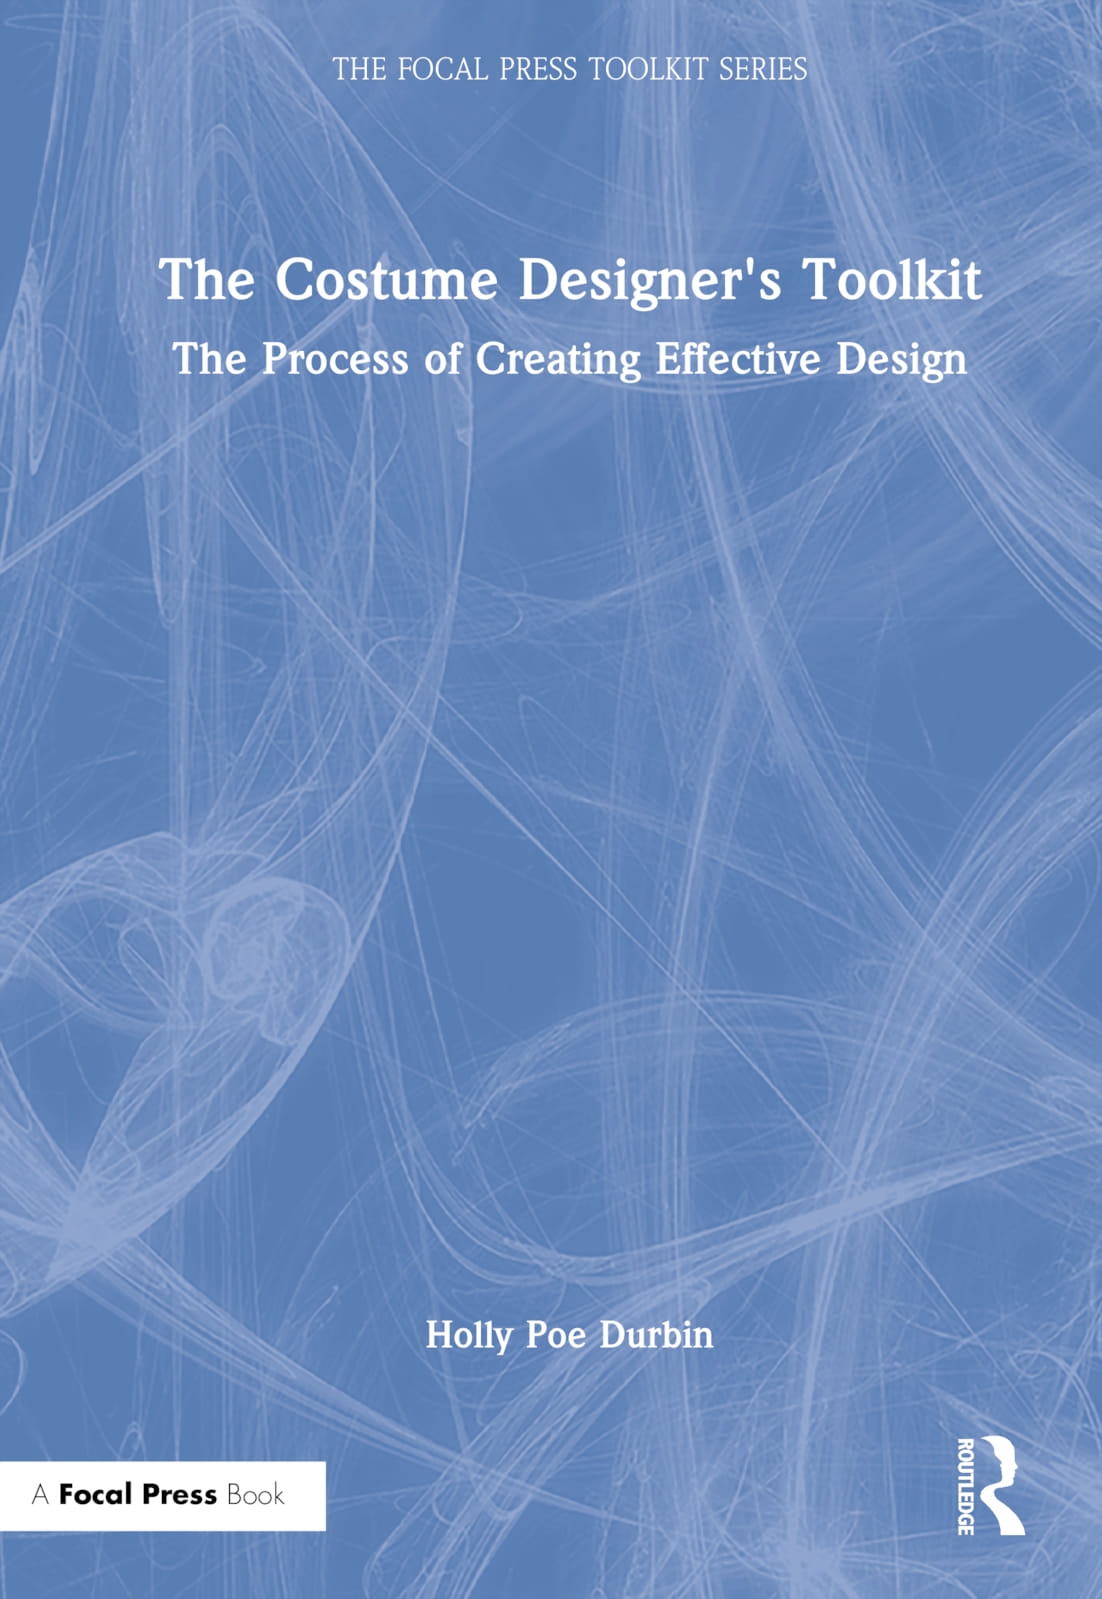 The Costume Designer’s Toolkit: The Process of Creating Effective Design